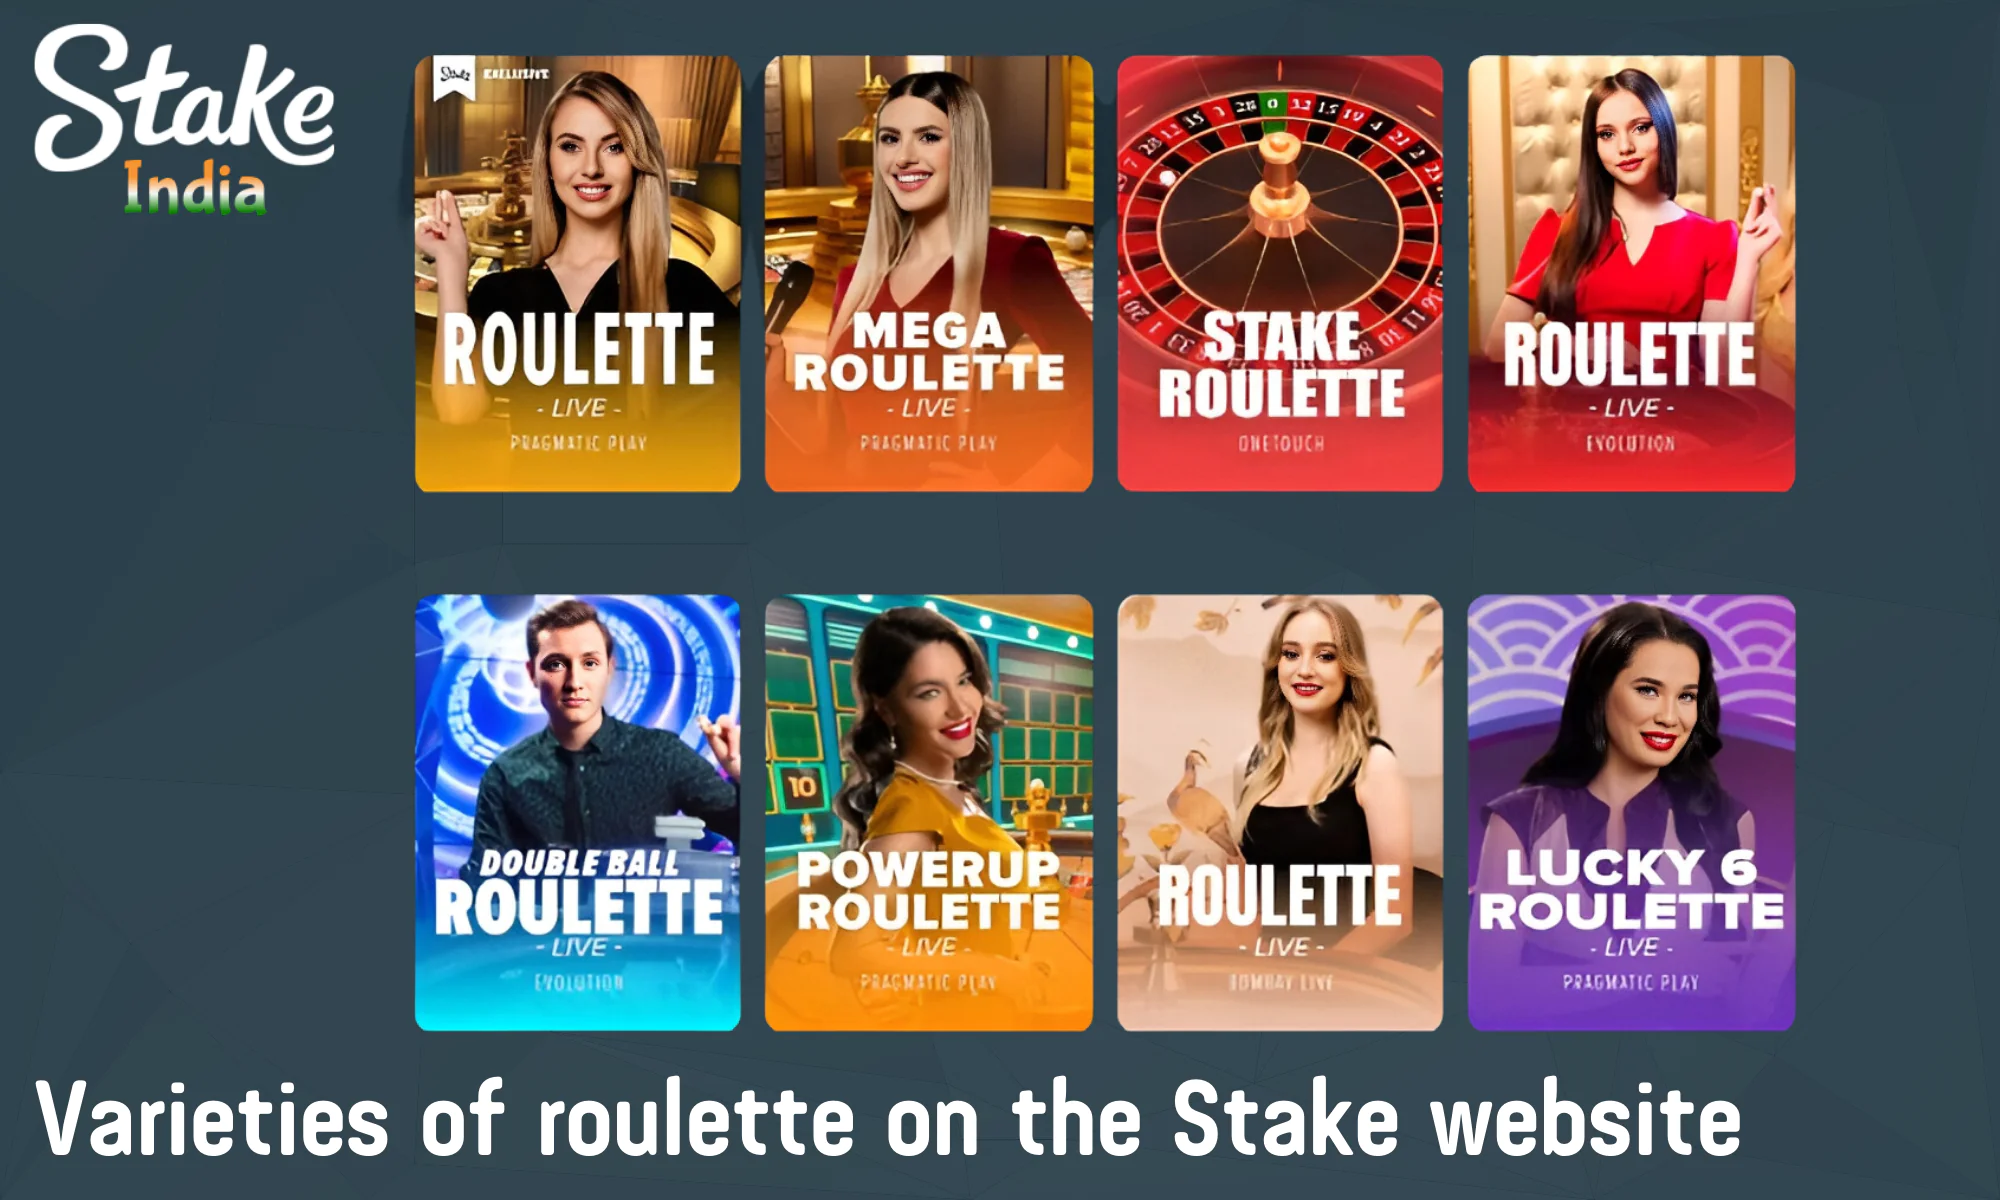 The Stake website offers 12 types of roulette